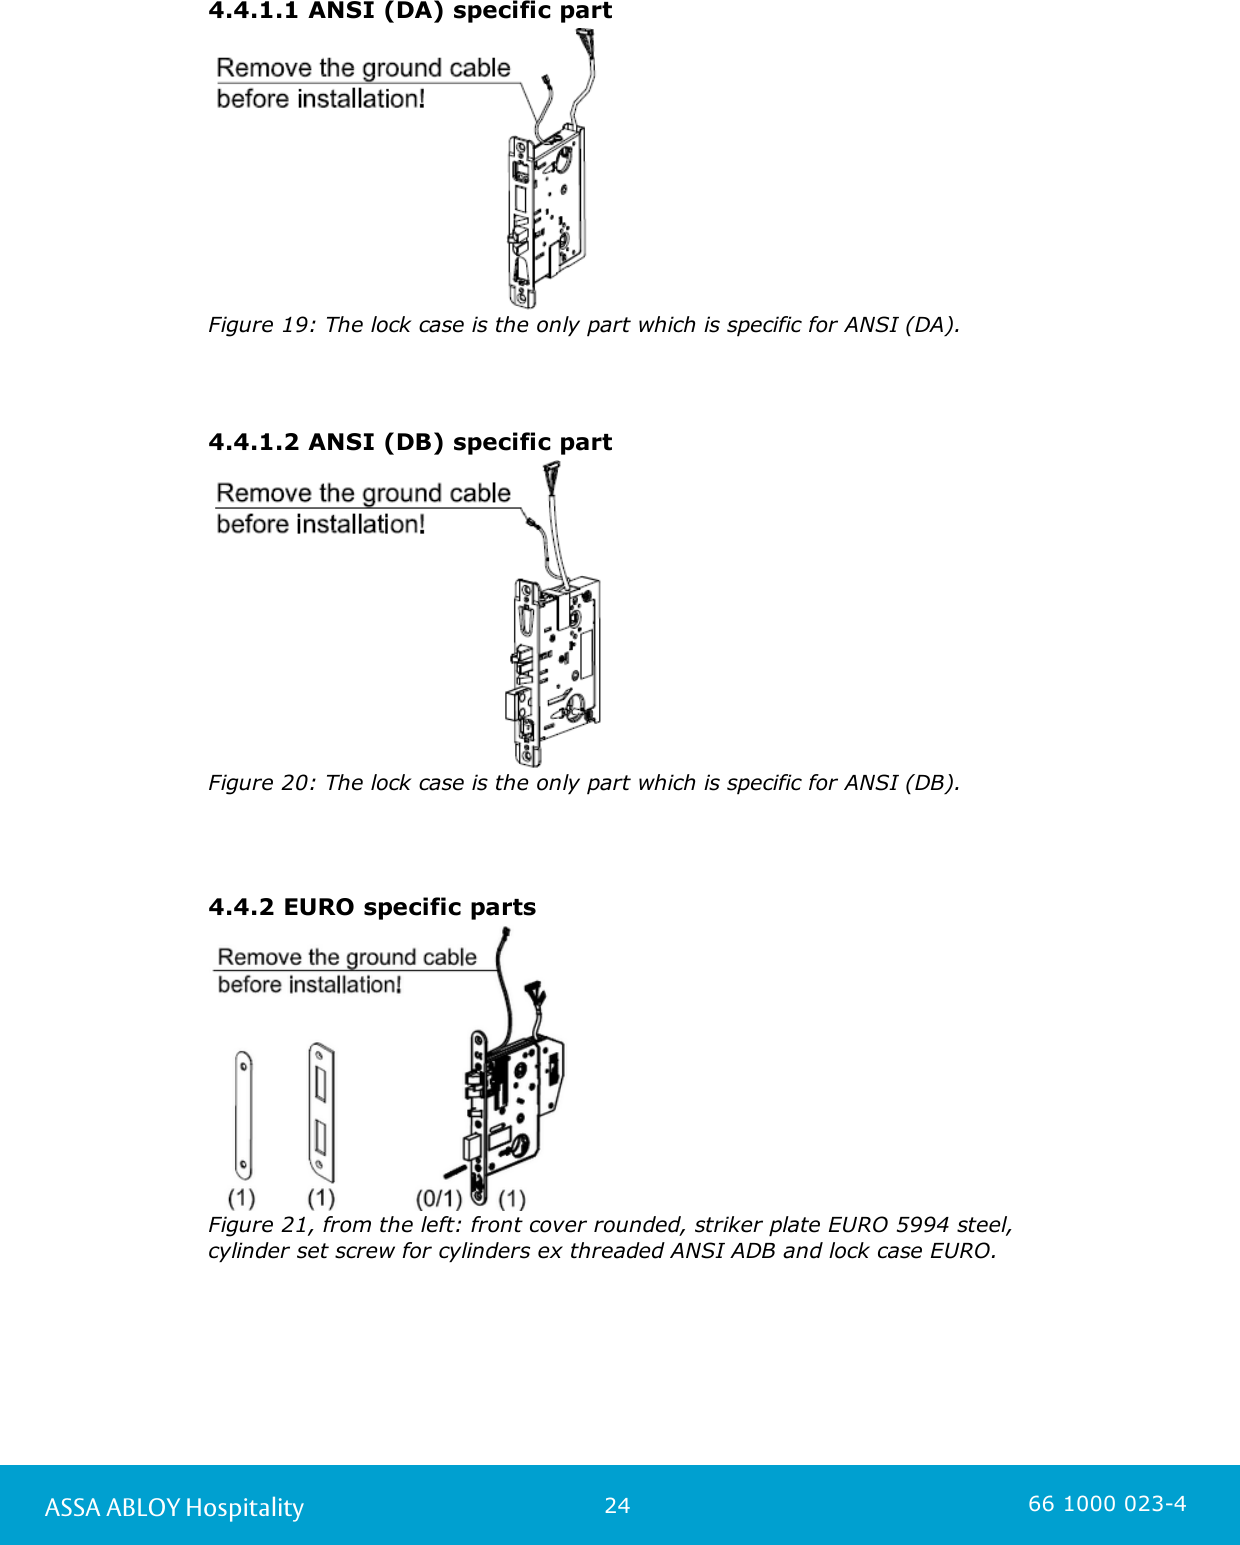 24ASSA ABLOY Hospitality 66 1000 023-44.4.1.1 ANSI (DA) specific partFigure 19: The lock case is the only part which is specific for ANSI (DA). 4.4.1.2 ANSI (DB) specific partFigure 20: The lock case is the only part which is specific for ANSI (DB). 4.4.2 EURO specific partsFigure 21, from the left: front cover rounded, striker plate EURO 5994 steel, cylinder set screw for cylinders ex threaded ANSI ADB and lock case EURO. 